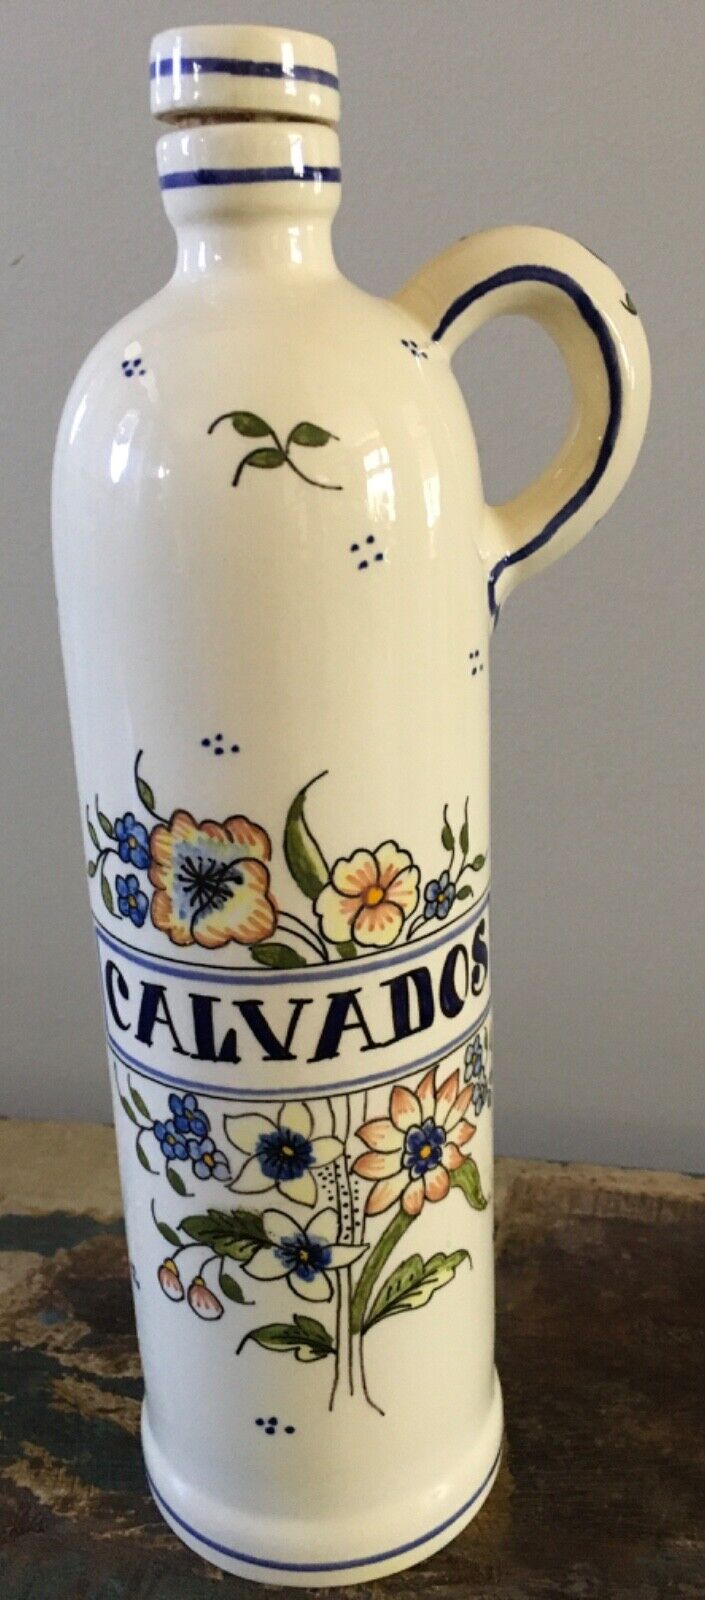 French Faience Pottery Rouen Fait Main 9.5” container & cork lid label Calvados